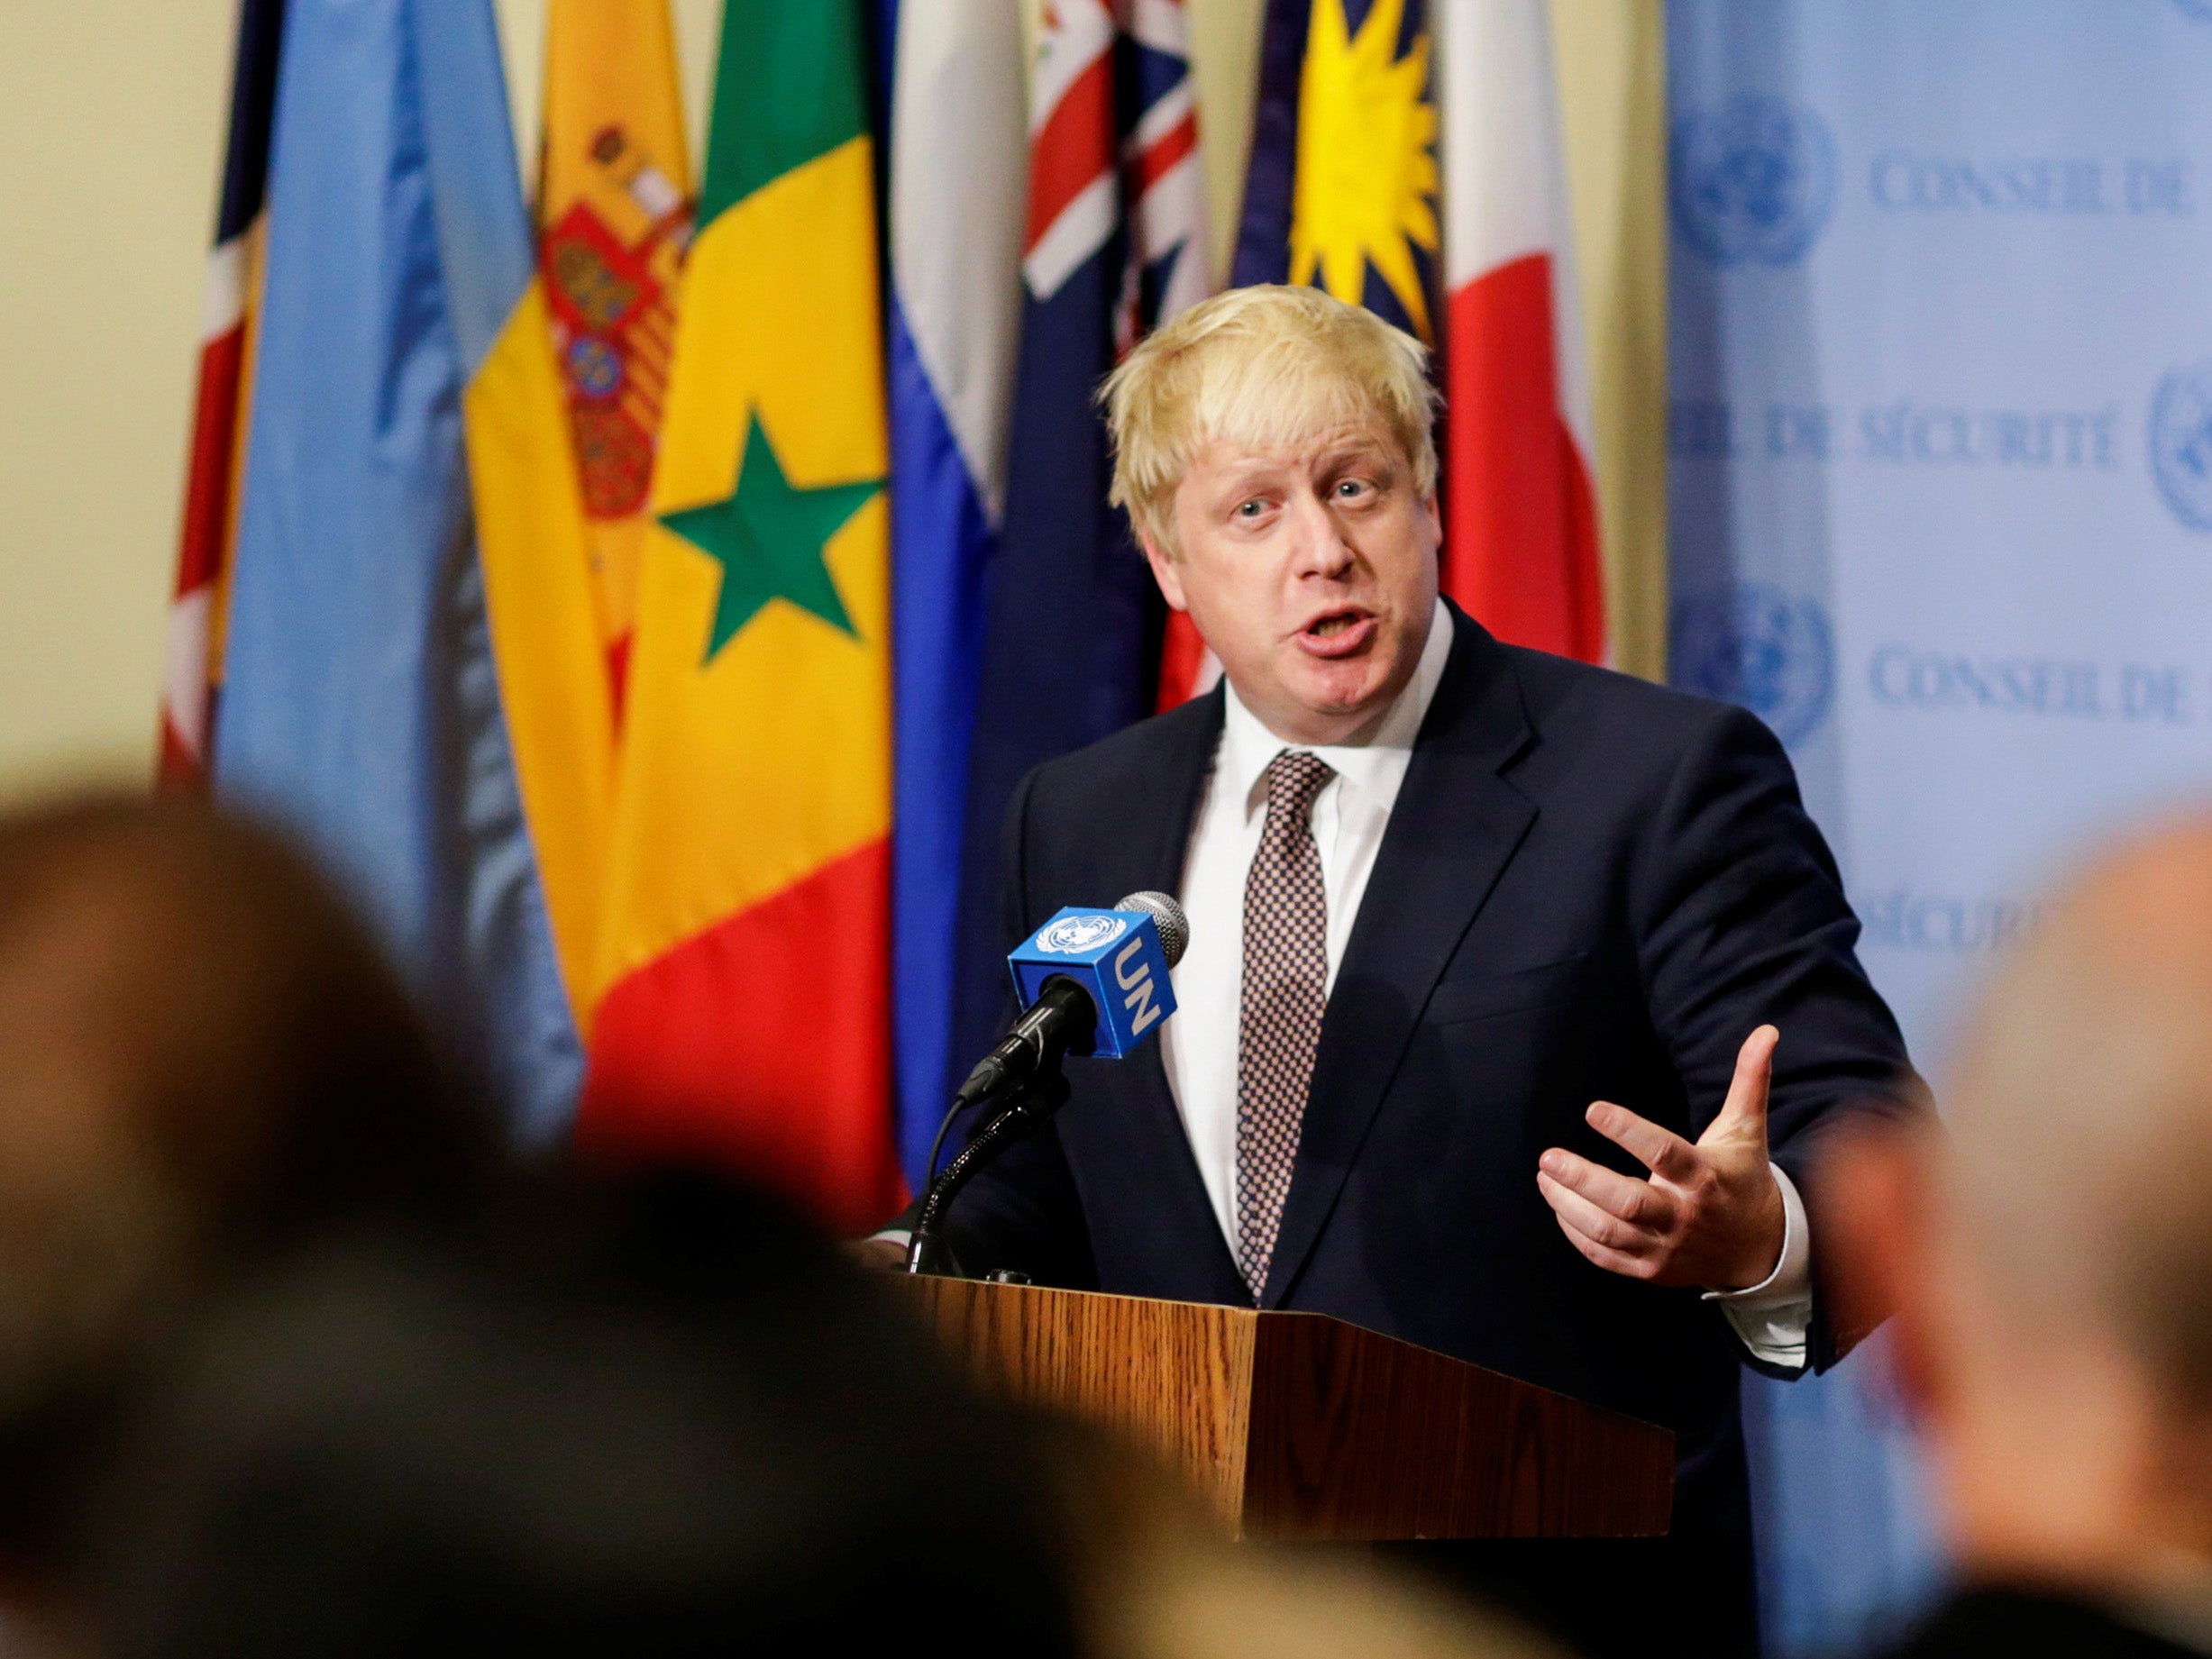 Foreign Secretary Boris Johnson has attacked Russia over its approach in Syria